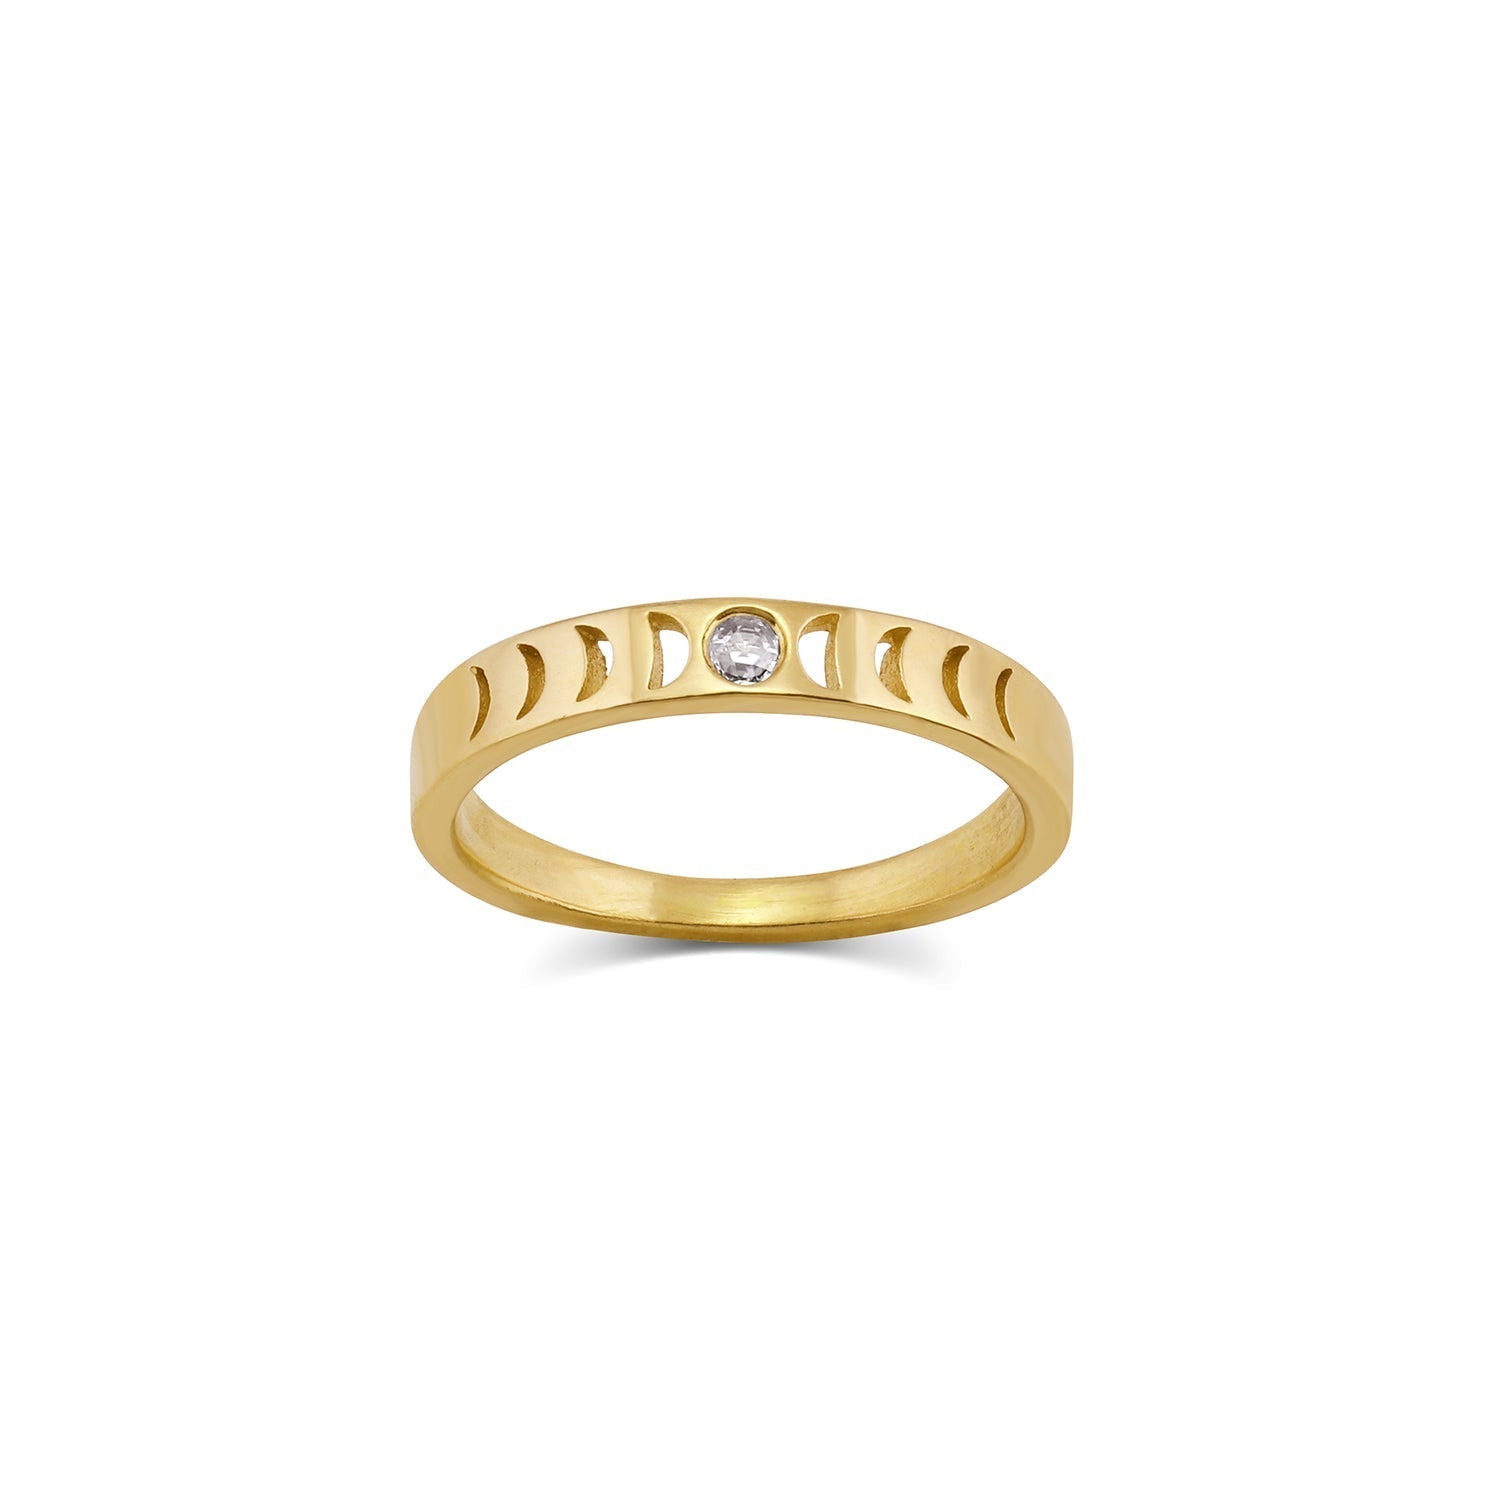 Moon Phase Rings moon phase rings > stacking rings > wedding bands > gender neutral bands > rose cut diamond ring > promise rings >lunar phase ring > moon ring > phases of the moon ring 14k yellow gold / 3 Original Moon Phase Ring | Rose Cut Diamond